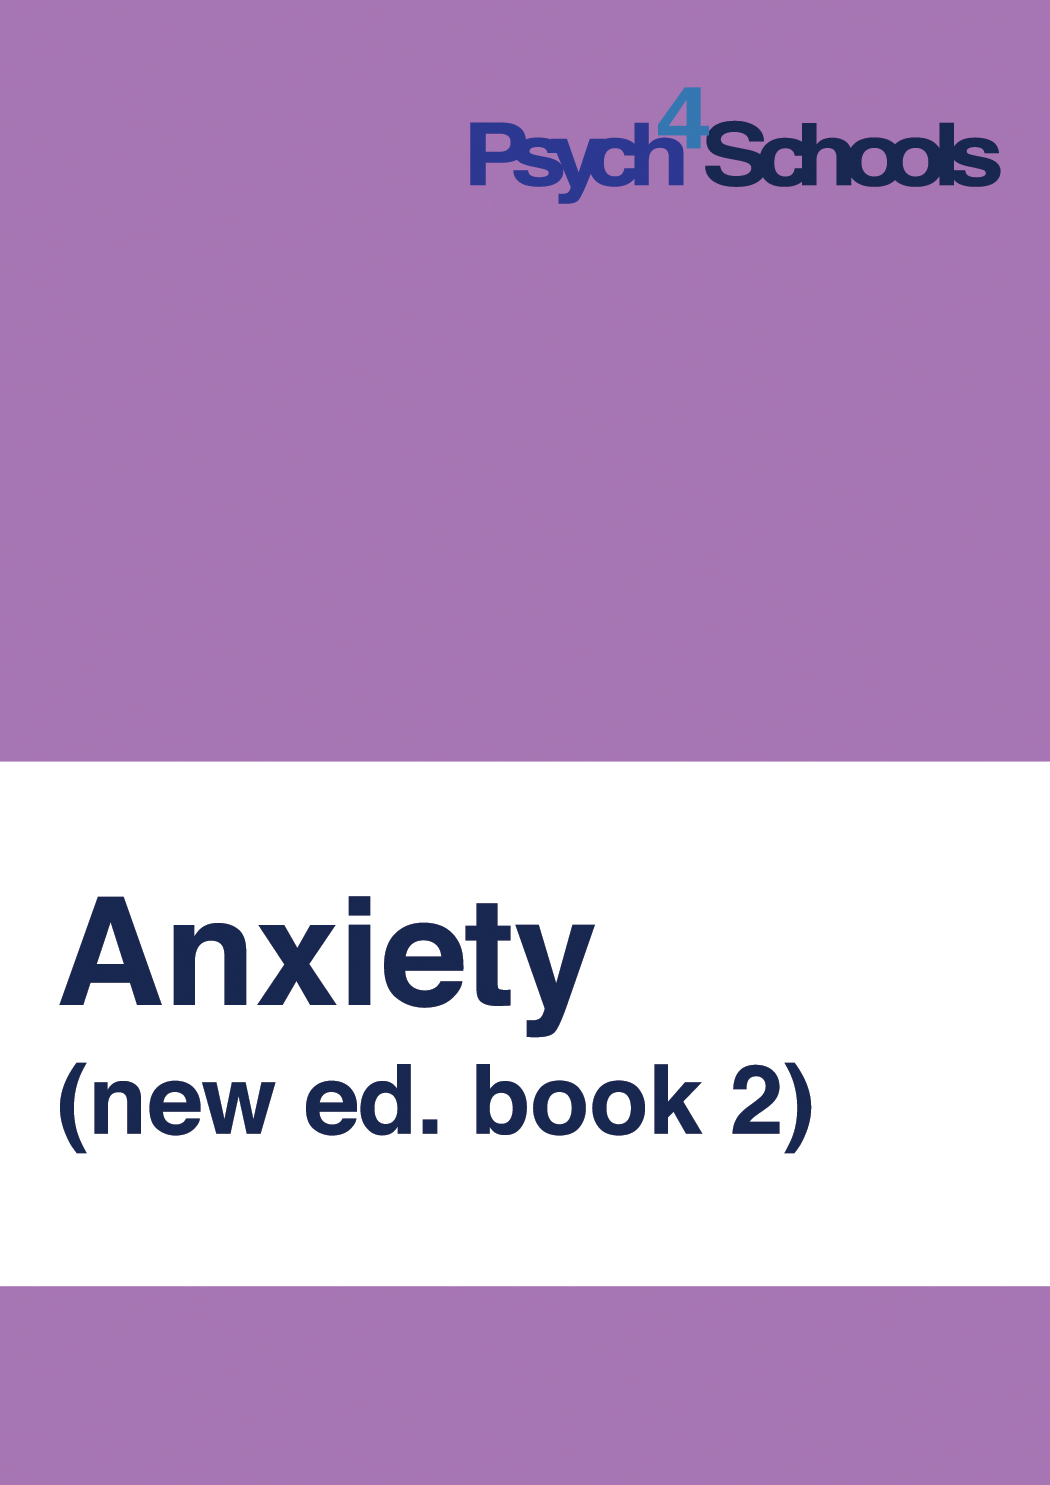 Anxiety (new ed. book 2)